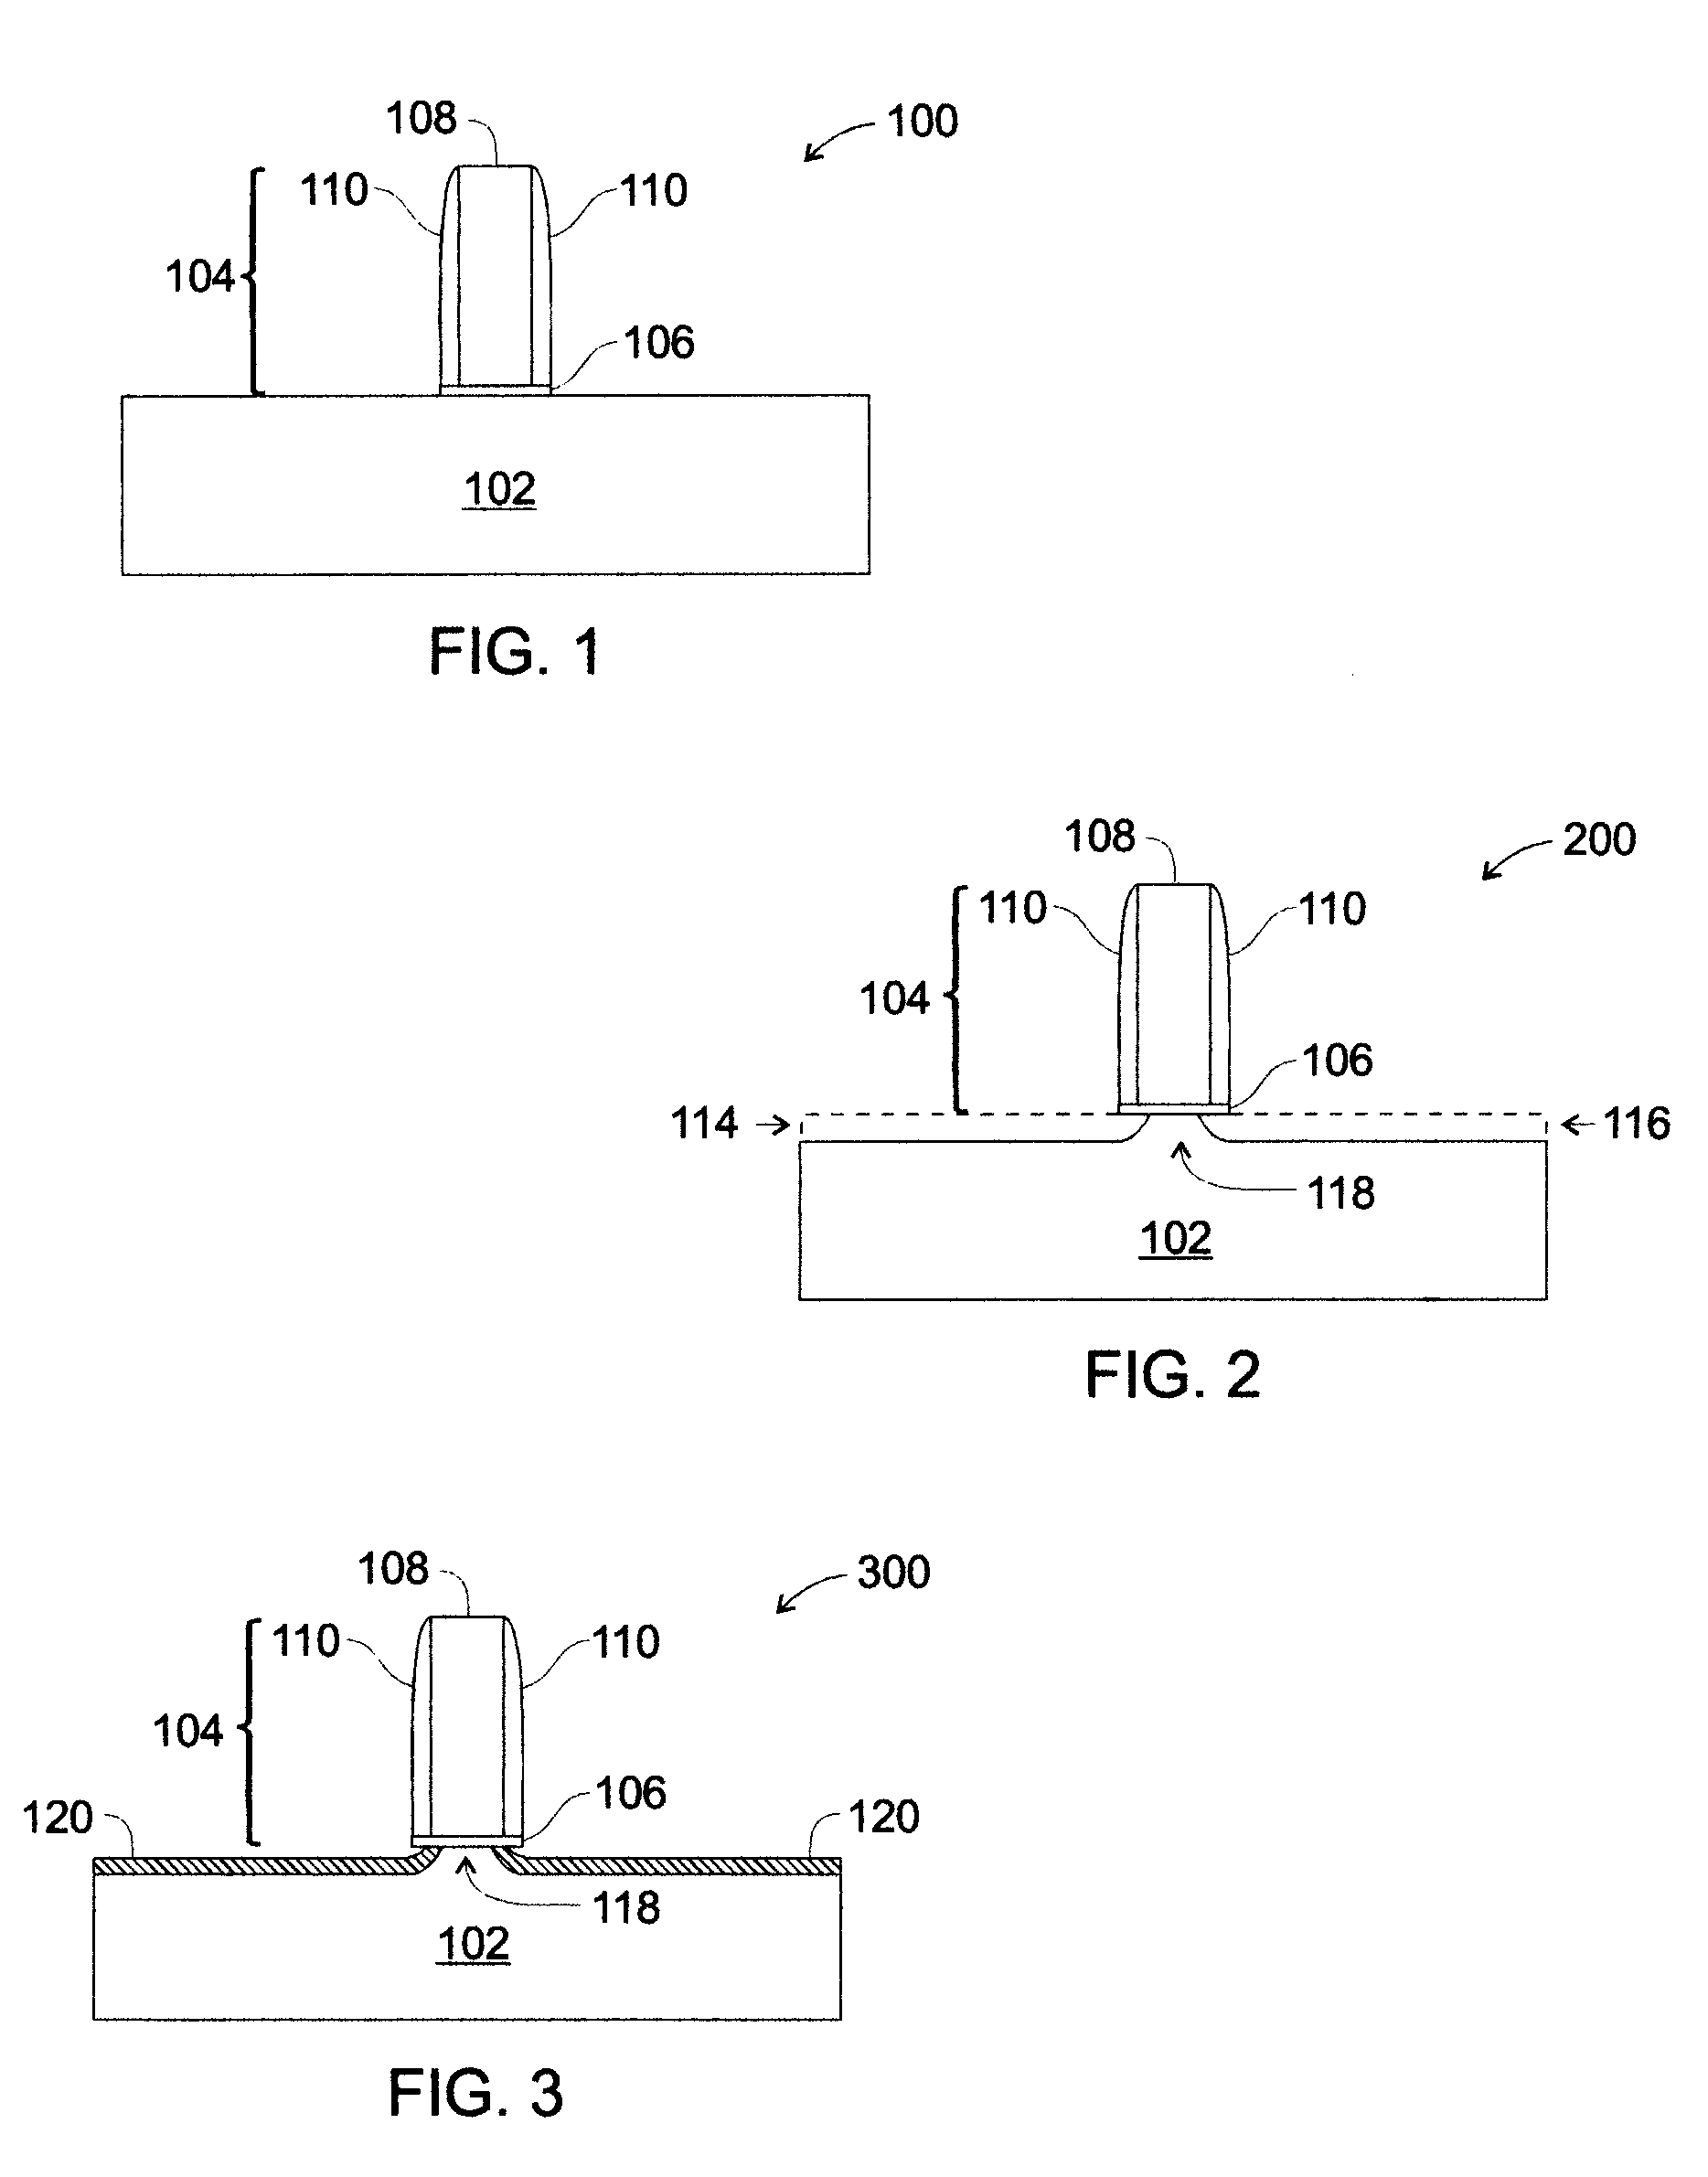 Method of forming ultra-thin silicidation-stop extensions in mosfet devices